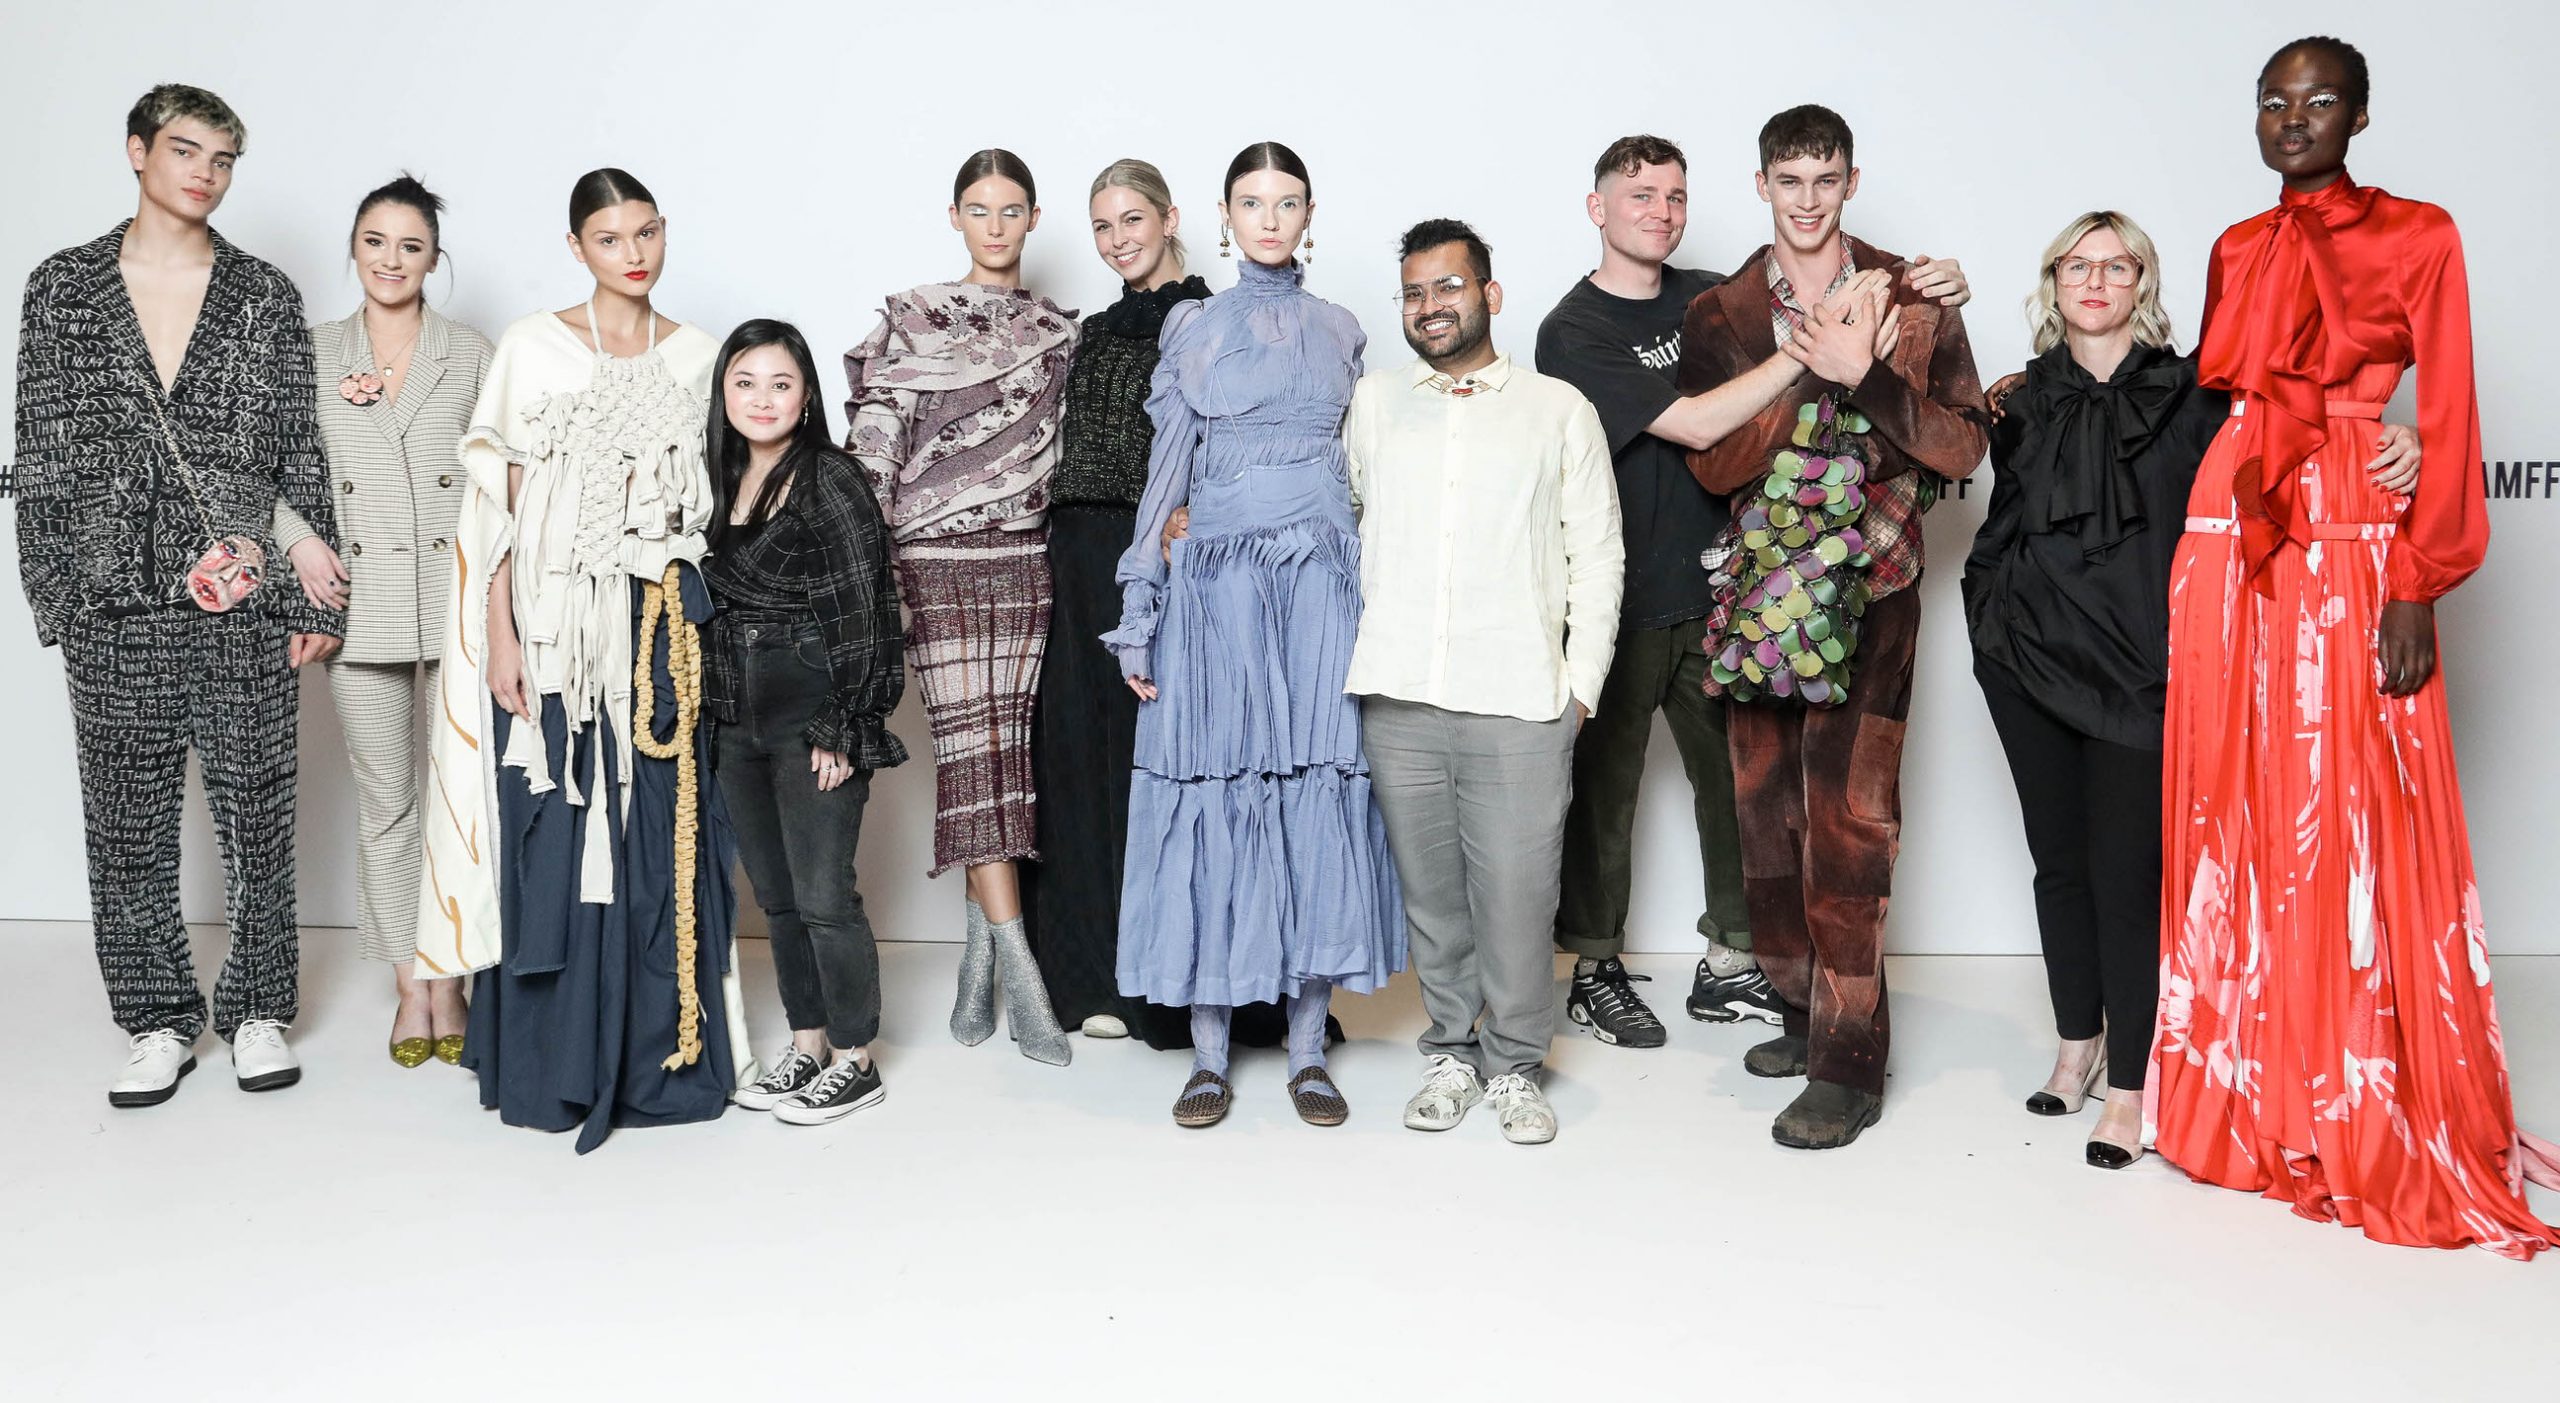 Graduate Designers show off their fashion style with their models, behind the scenes at VAMFF 2019